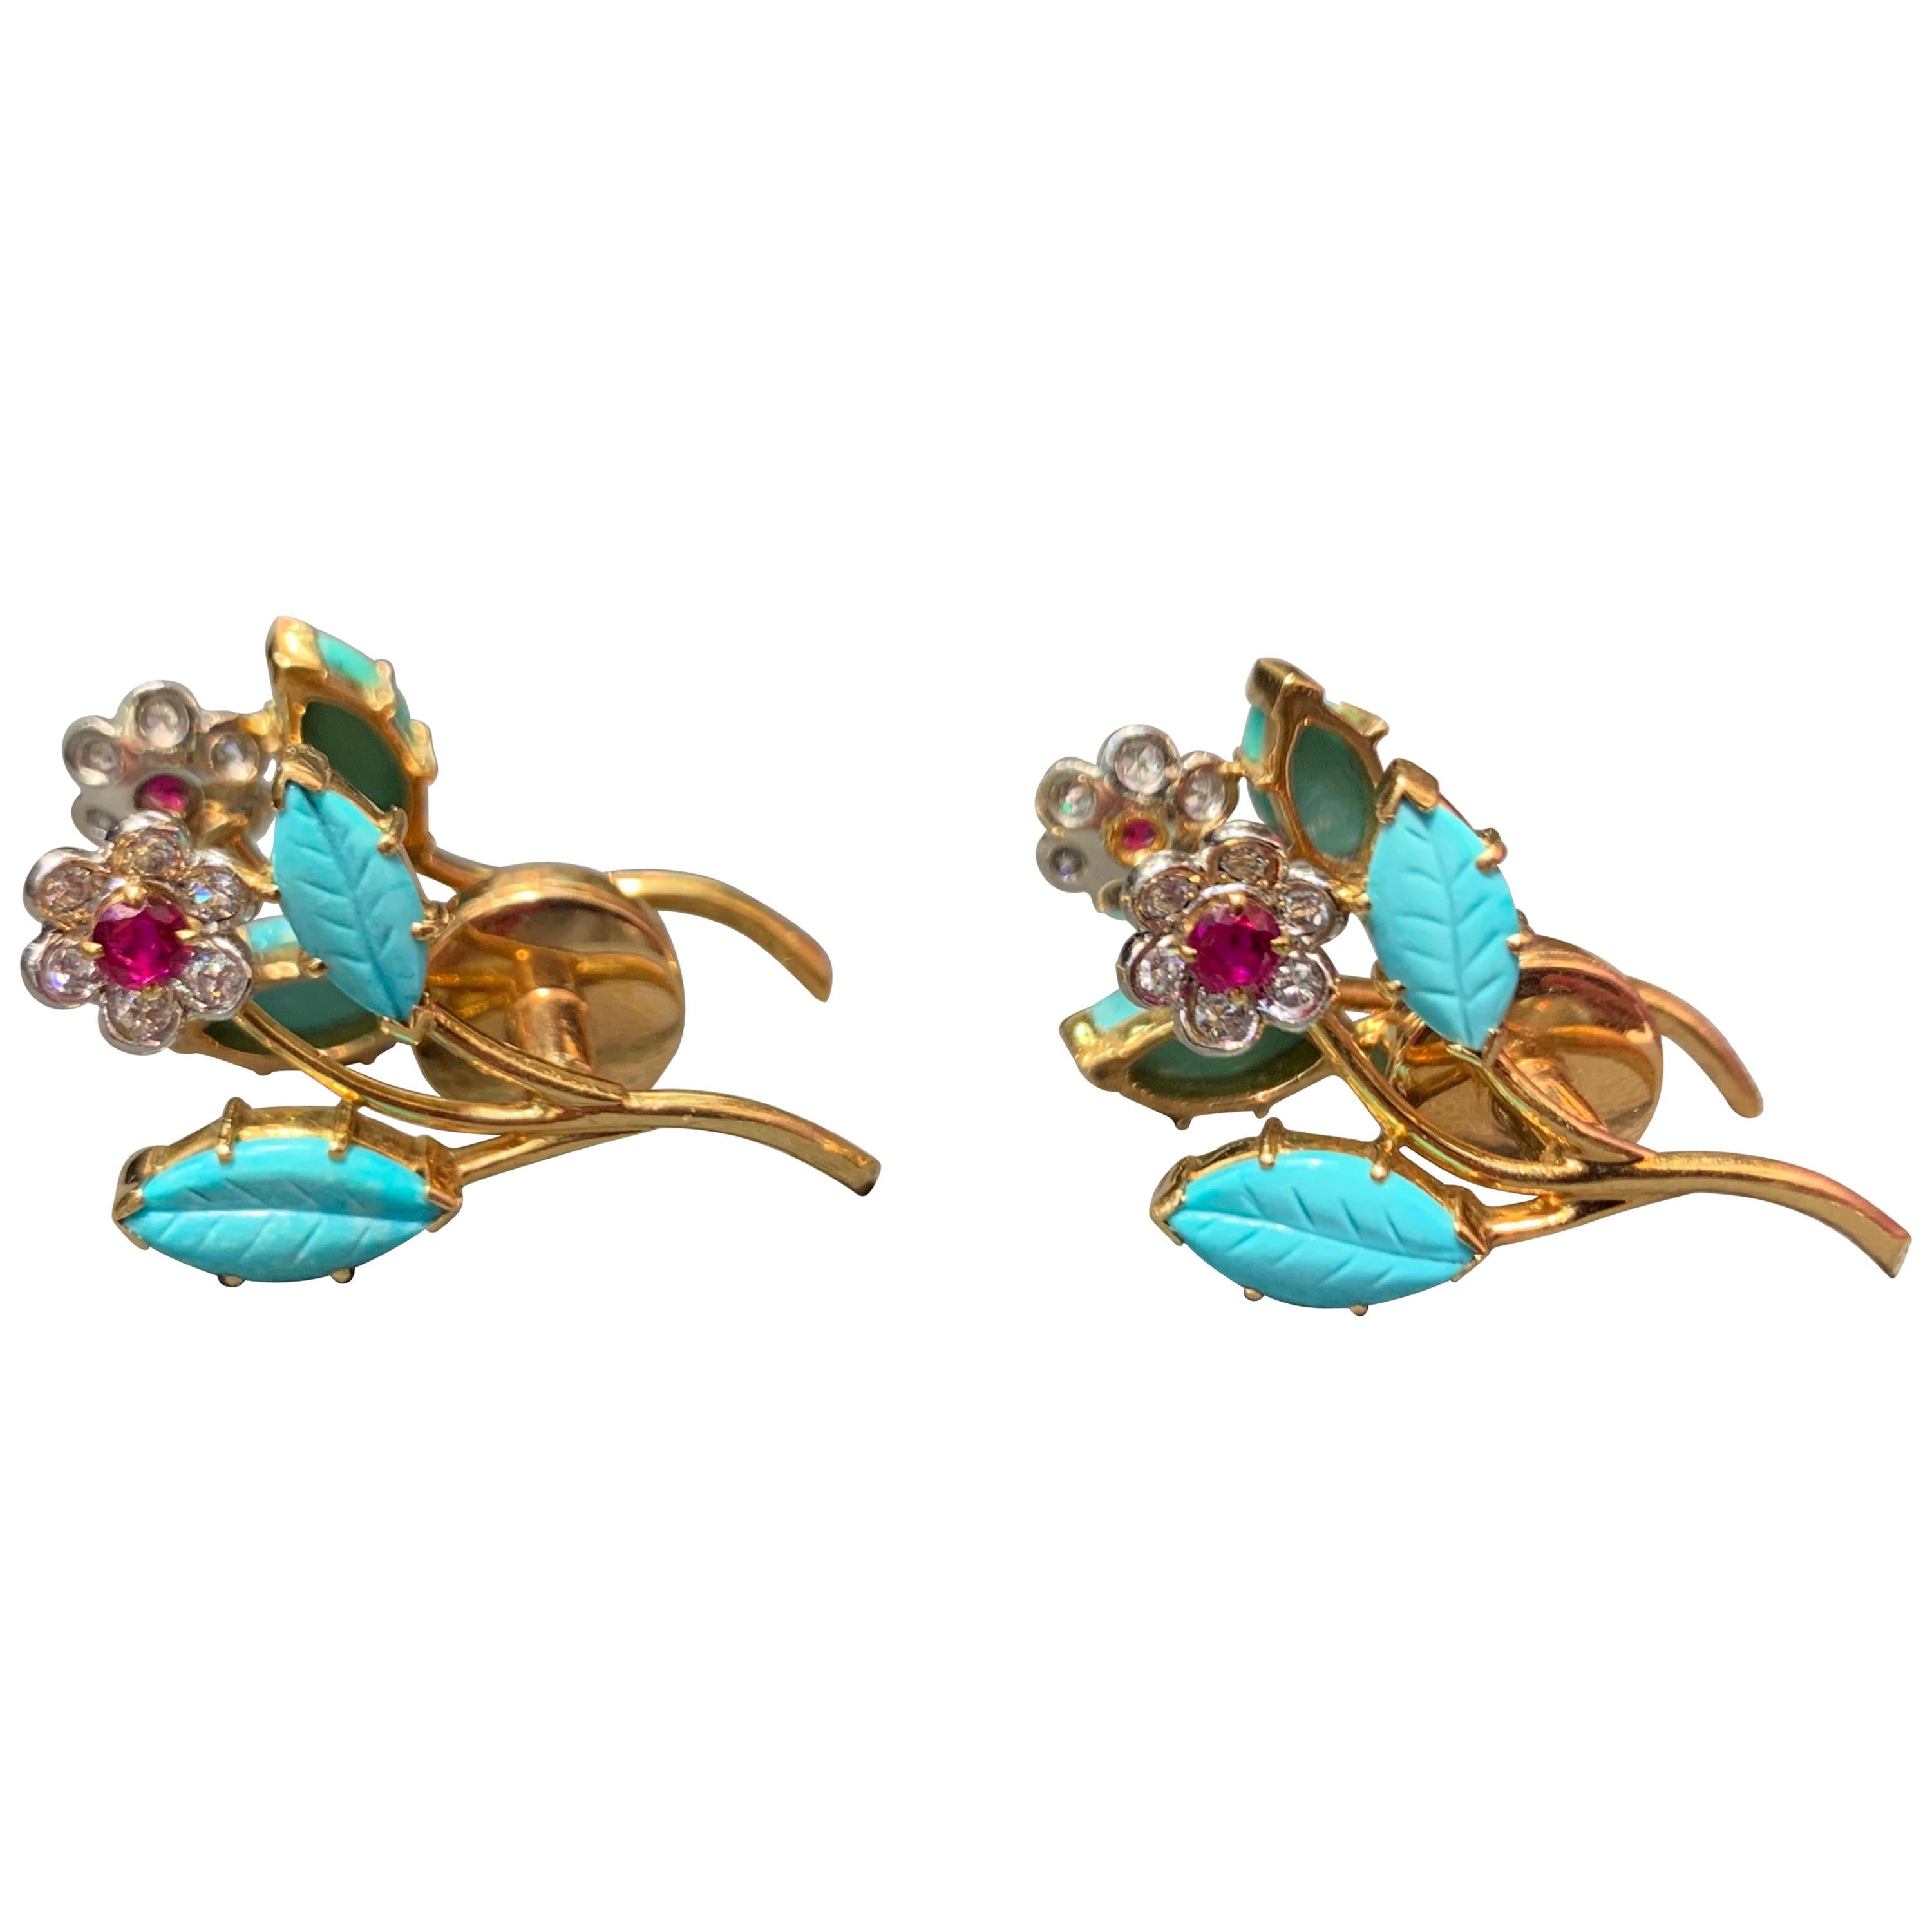 Carved Turquoise Floral Cufflinks